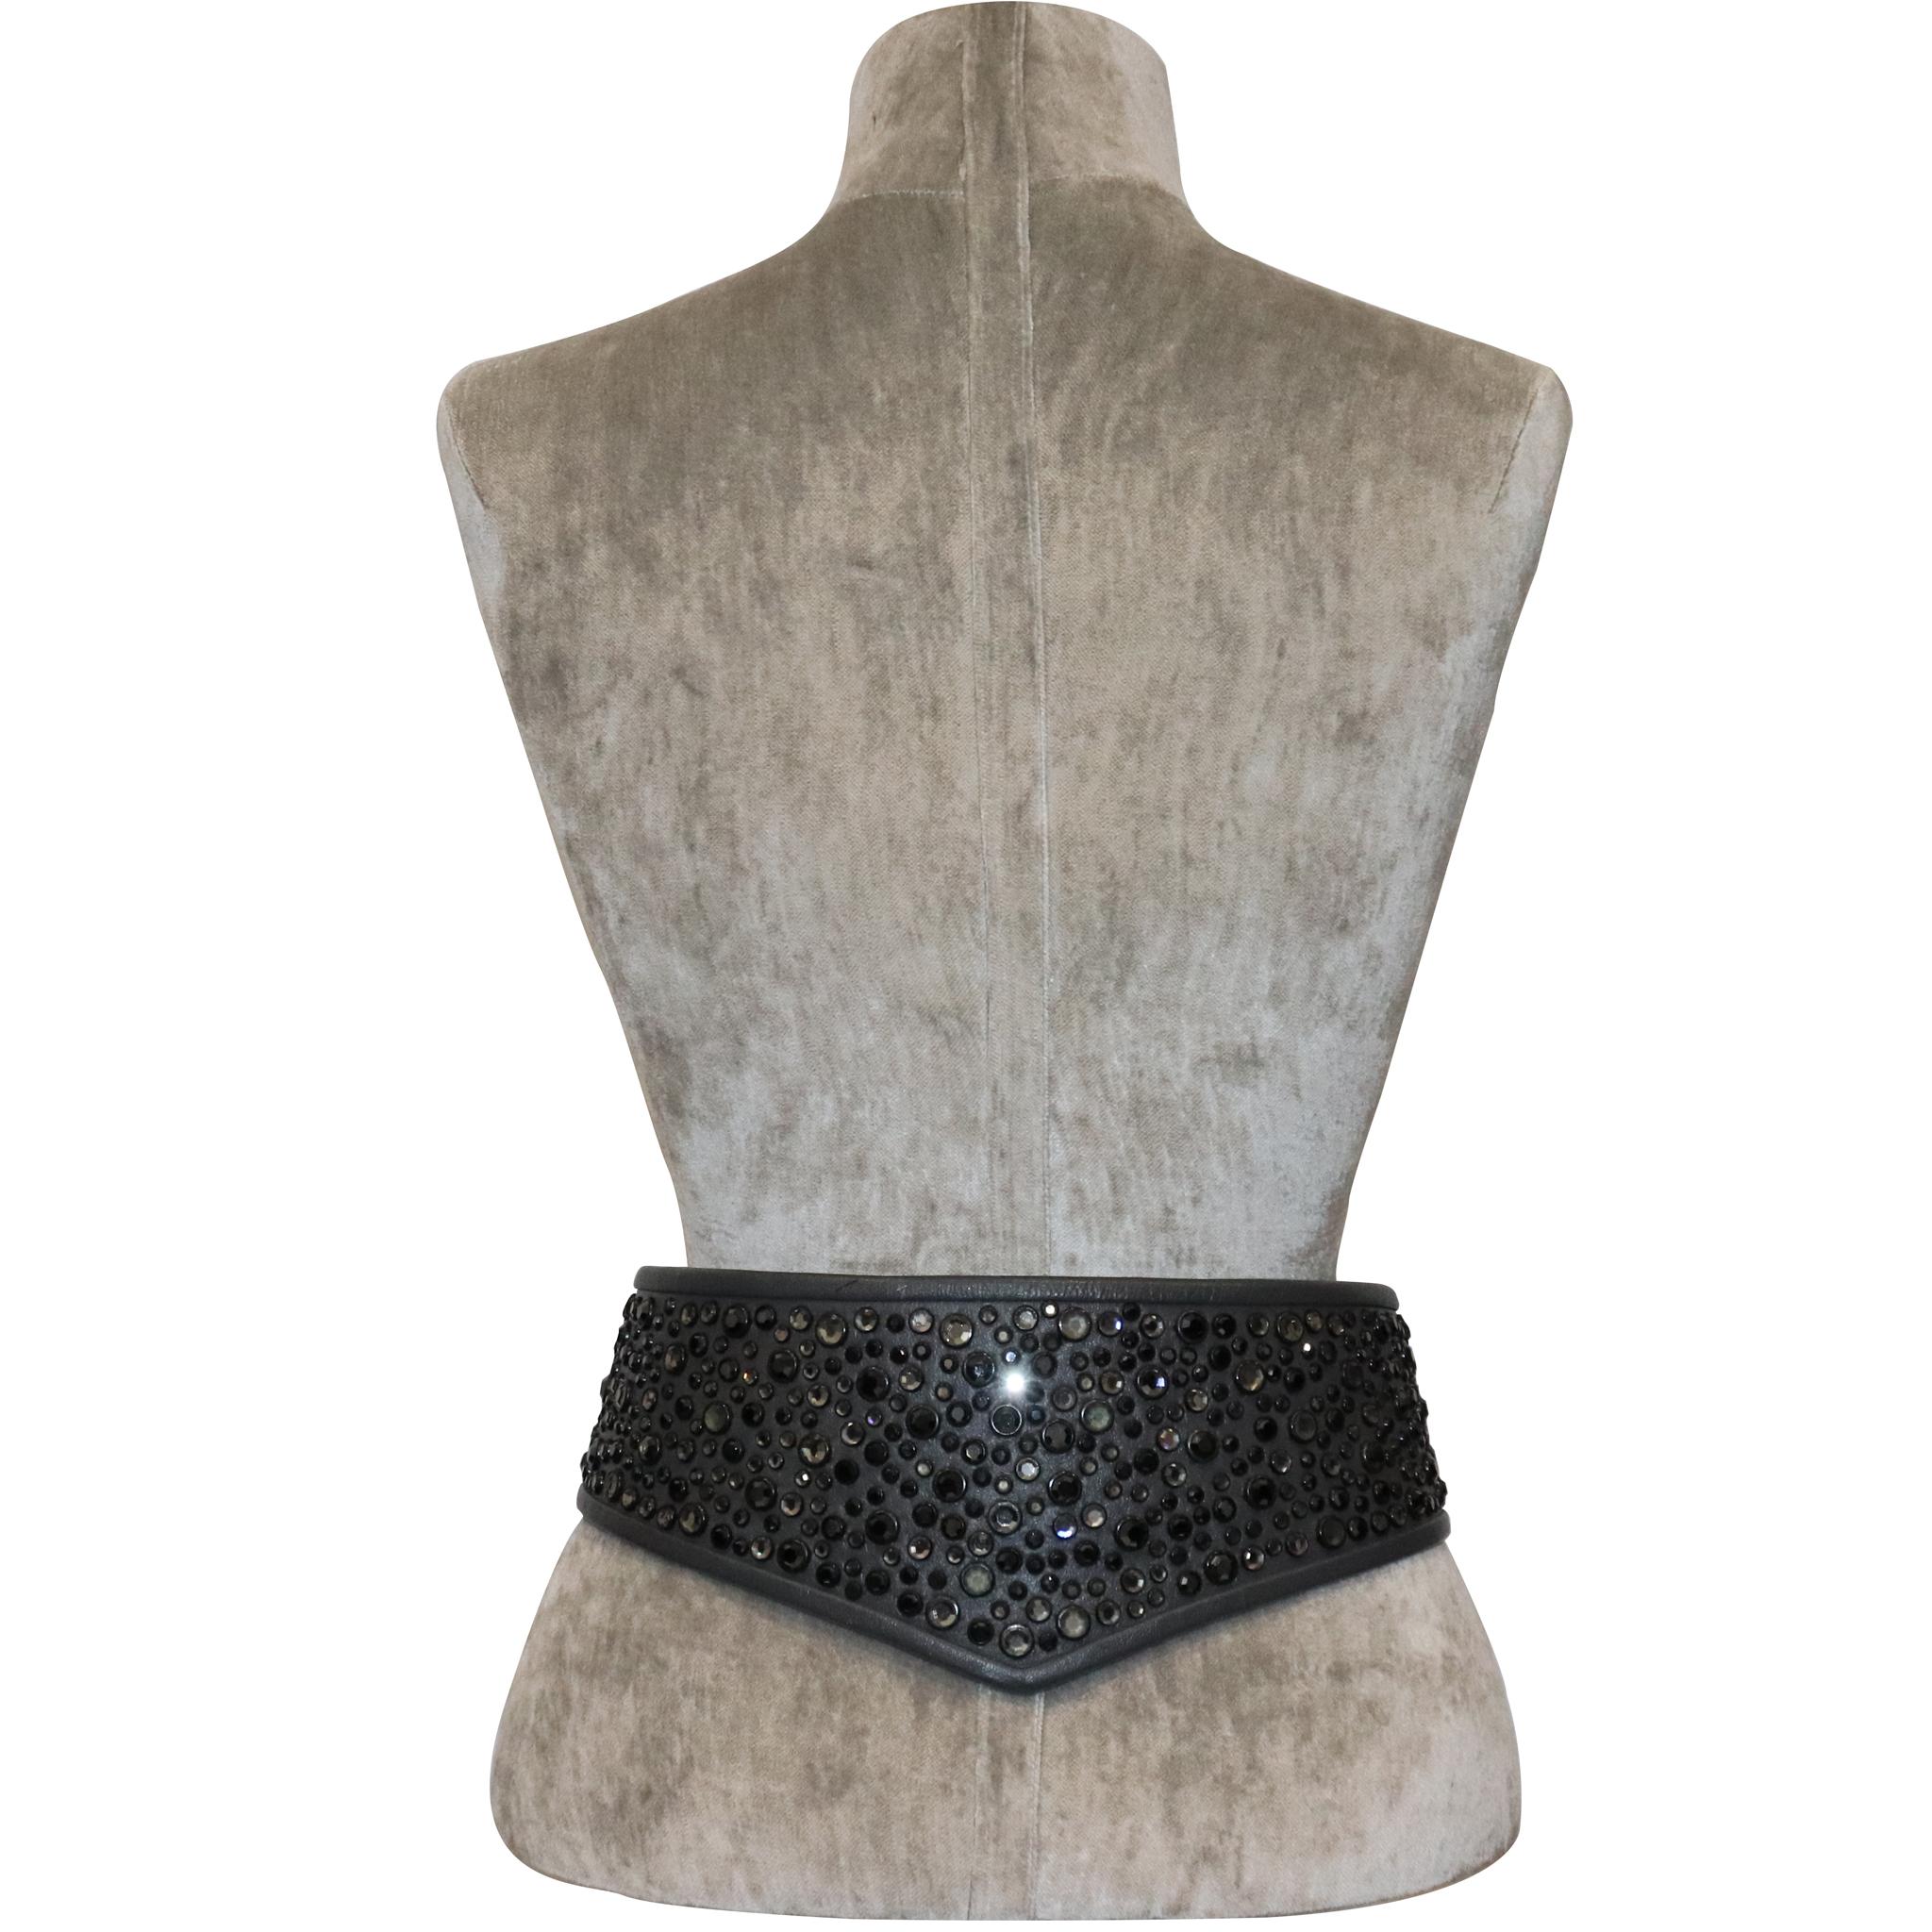 Galanos Gunmetal Rhinestone Wide Leather Belt. Vintage belt from 1980s in excellent condition 

Measurements: 

Length - 33.4 inches 
Height - 4.8 inches 